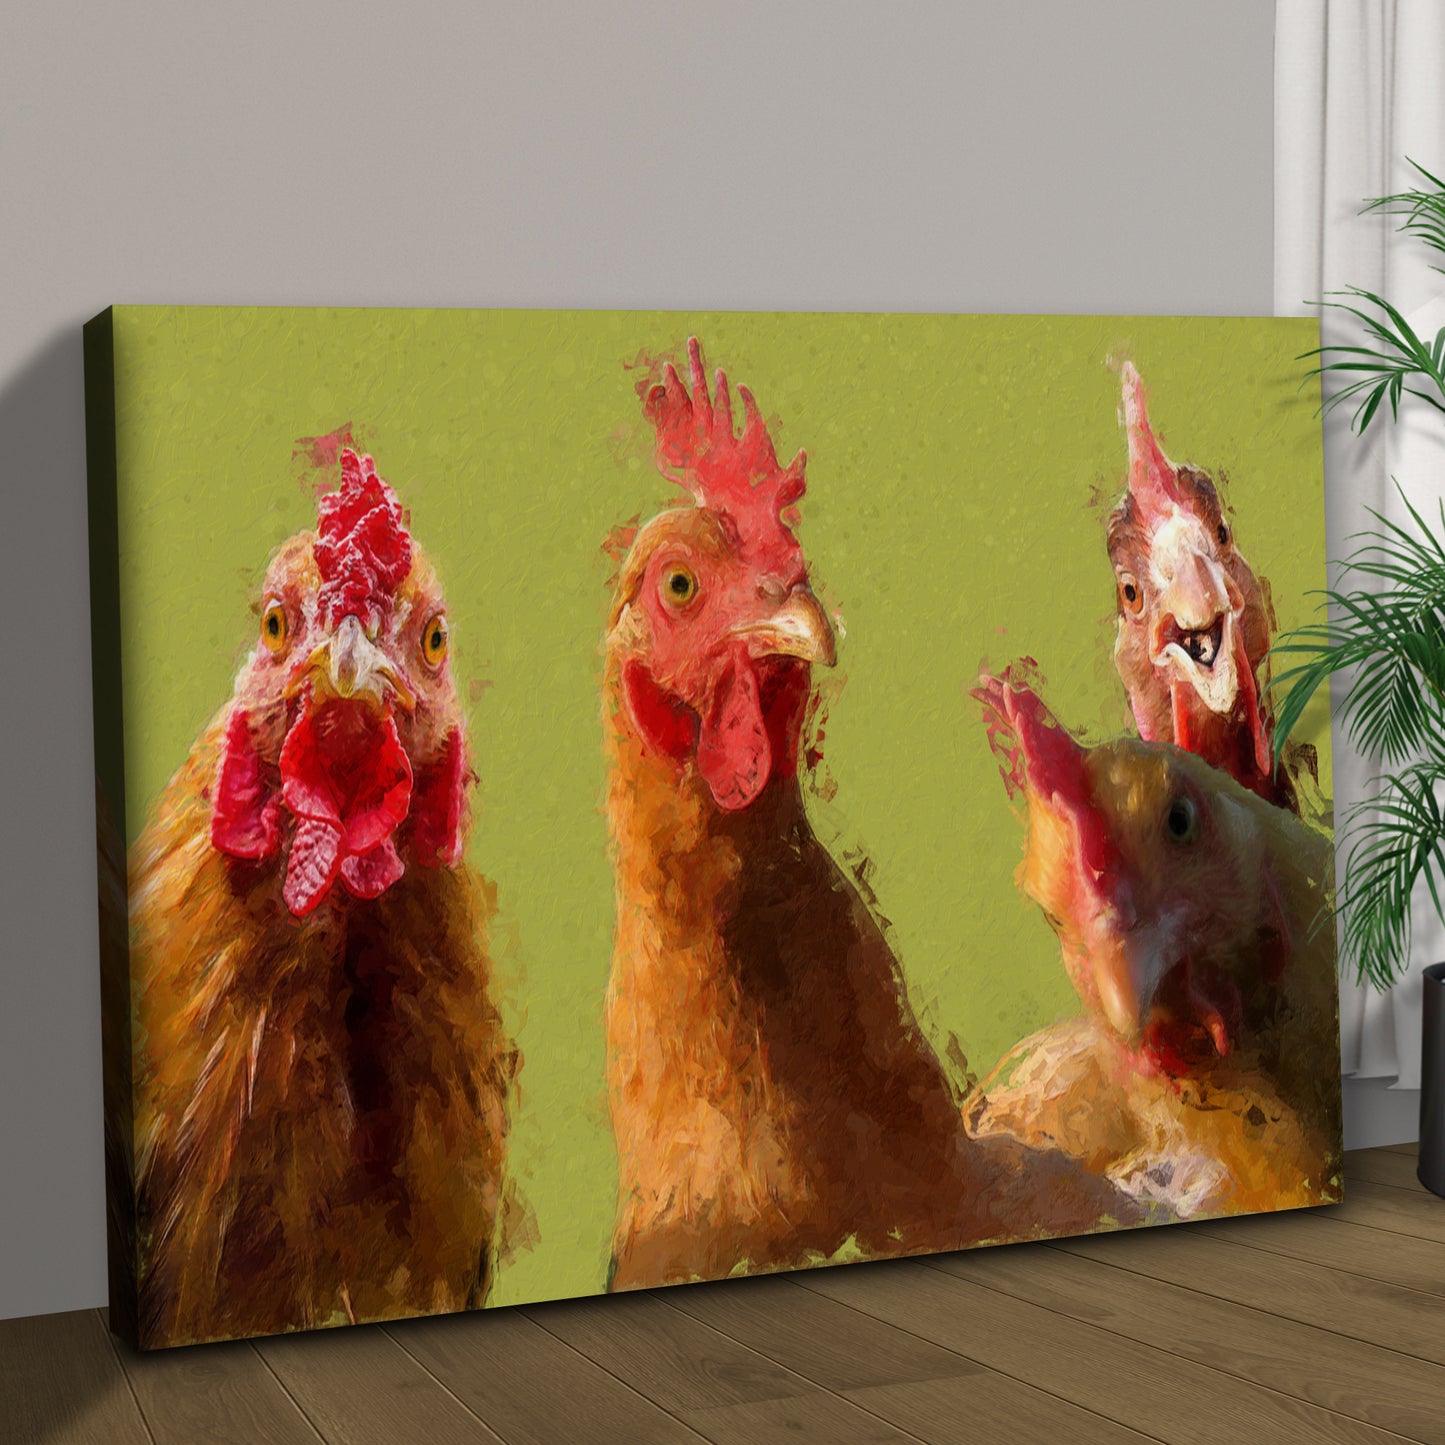 Curious Chicken Rooster Canvas Wall Art Style 1 - Image by Tailored Canvases